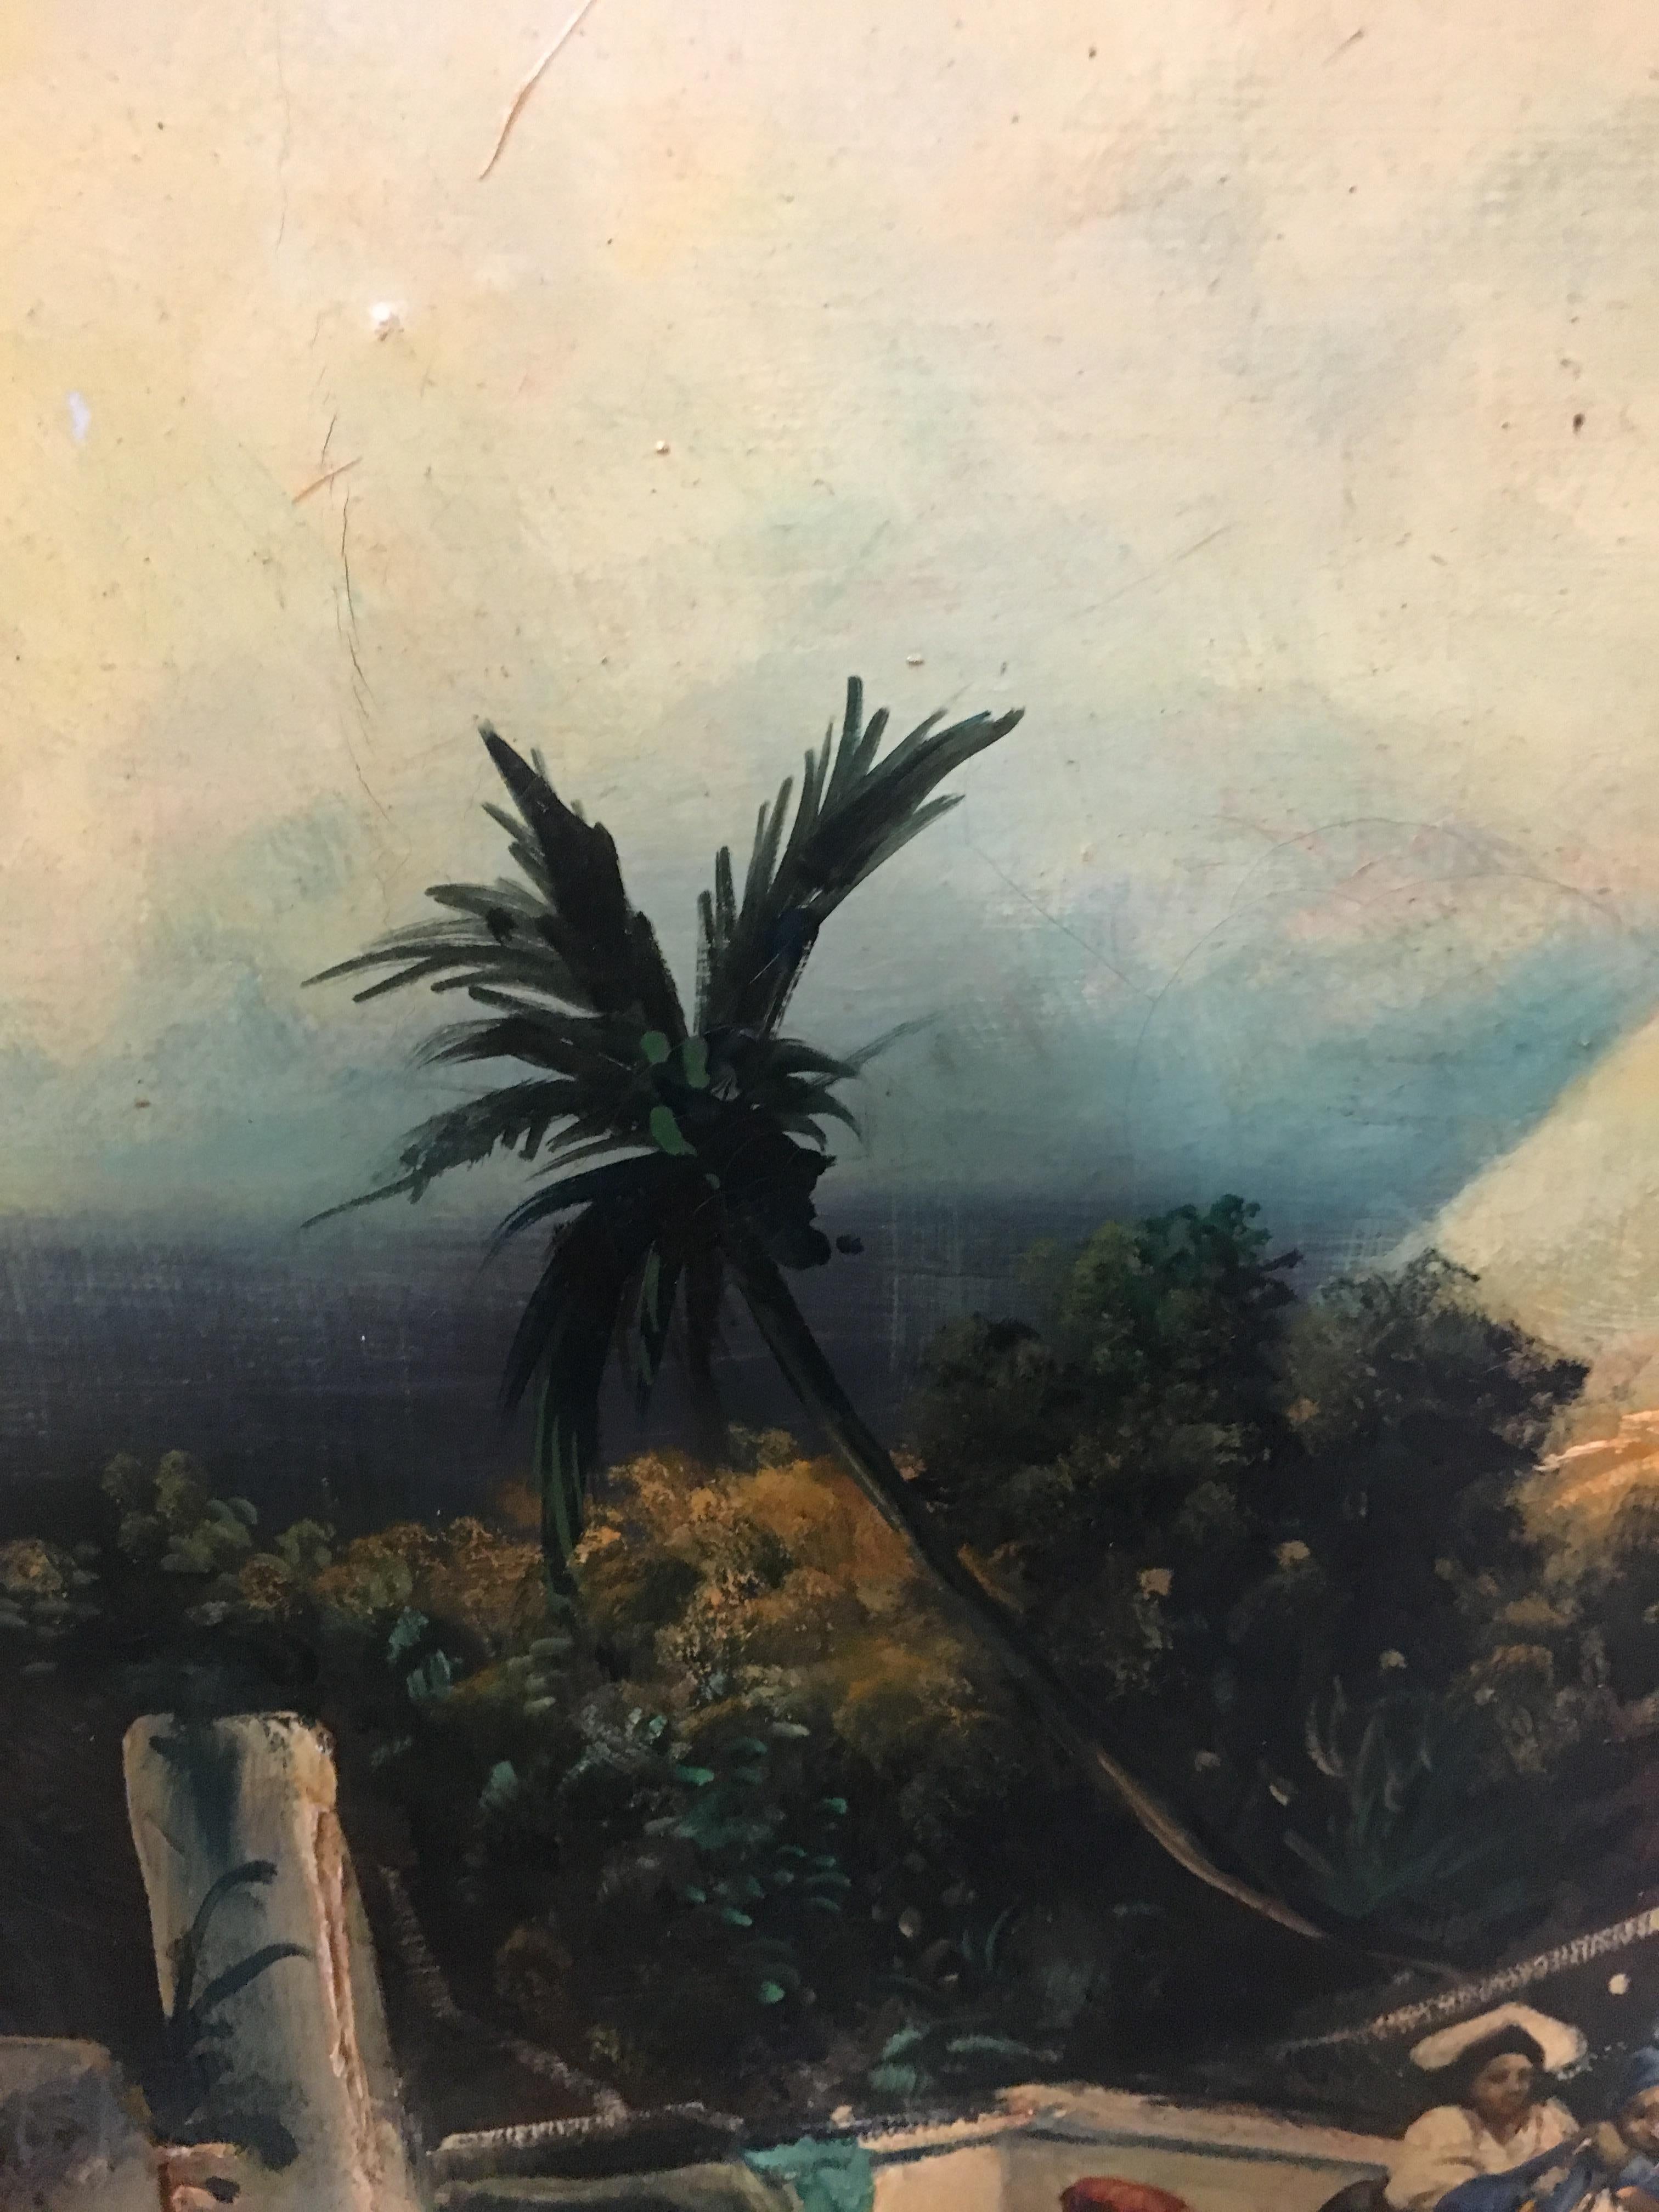 CAPRI -In the Manner of Giacinto Gigante-Posillipo School- Landescape-Painting - Brown Landscape Painting by Paolo De Robertis